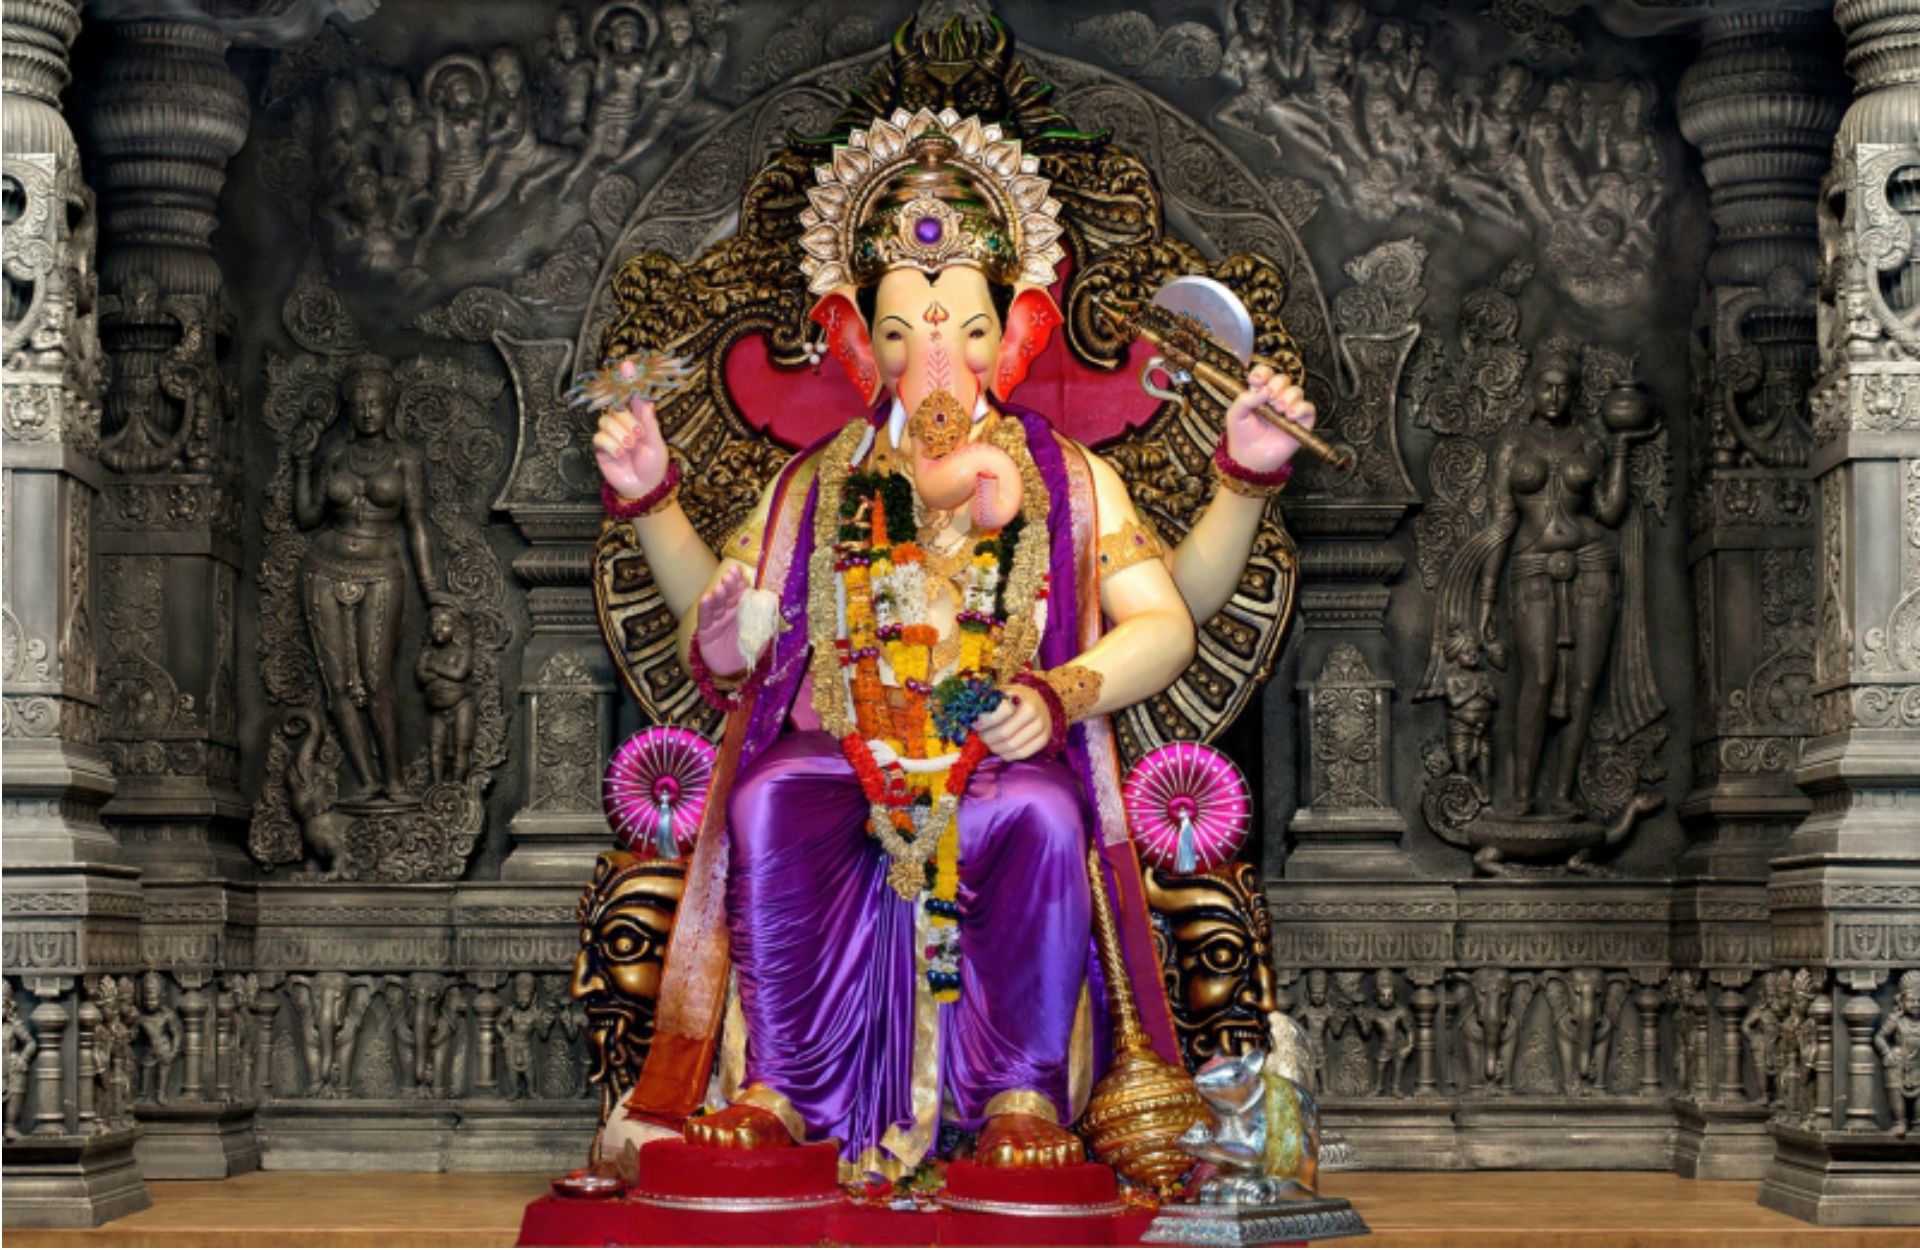 Lalbaugcha Raja 2019 First Look HD Image For Free Download Online: Check Ganpati Bappa Idols From Previous Years' Ganesh Chaturthi Celebrations Since 2000